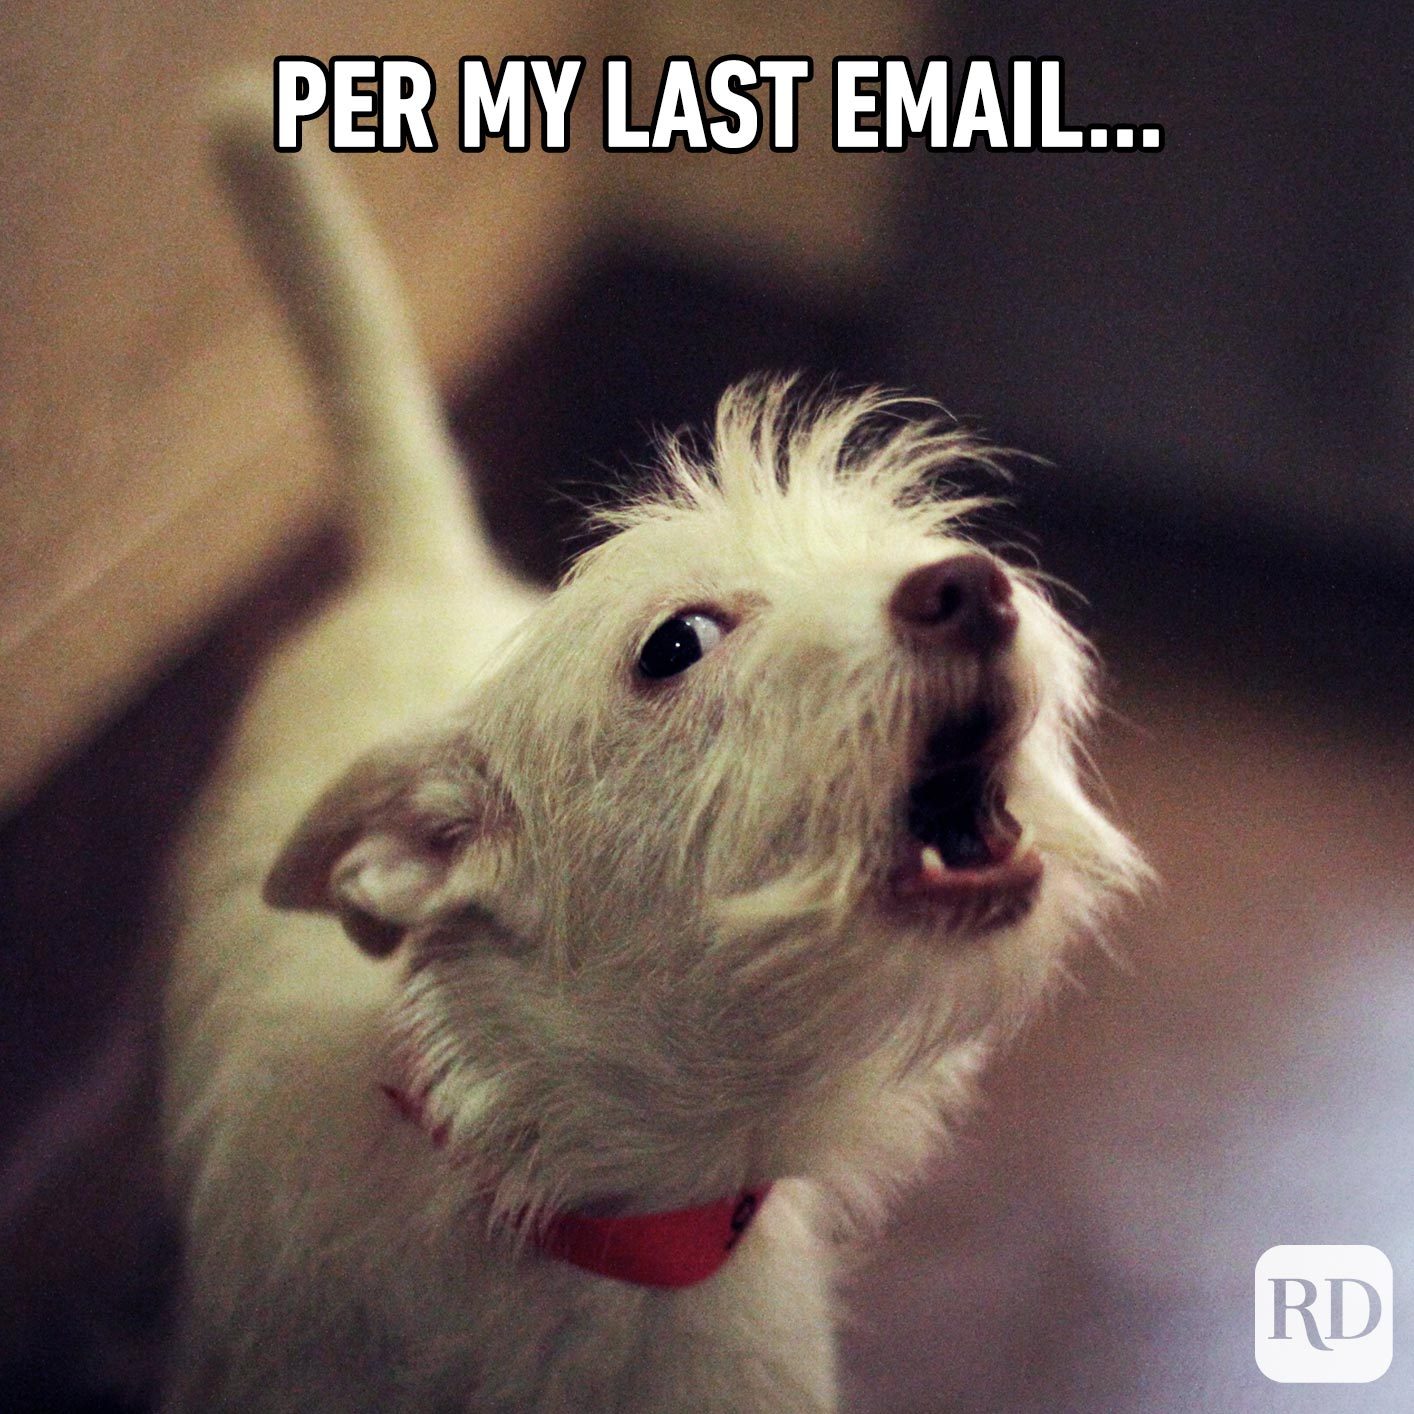 Dog growling. Meme text: PER MY LAST EMAIL…